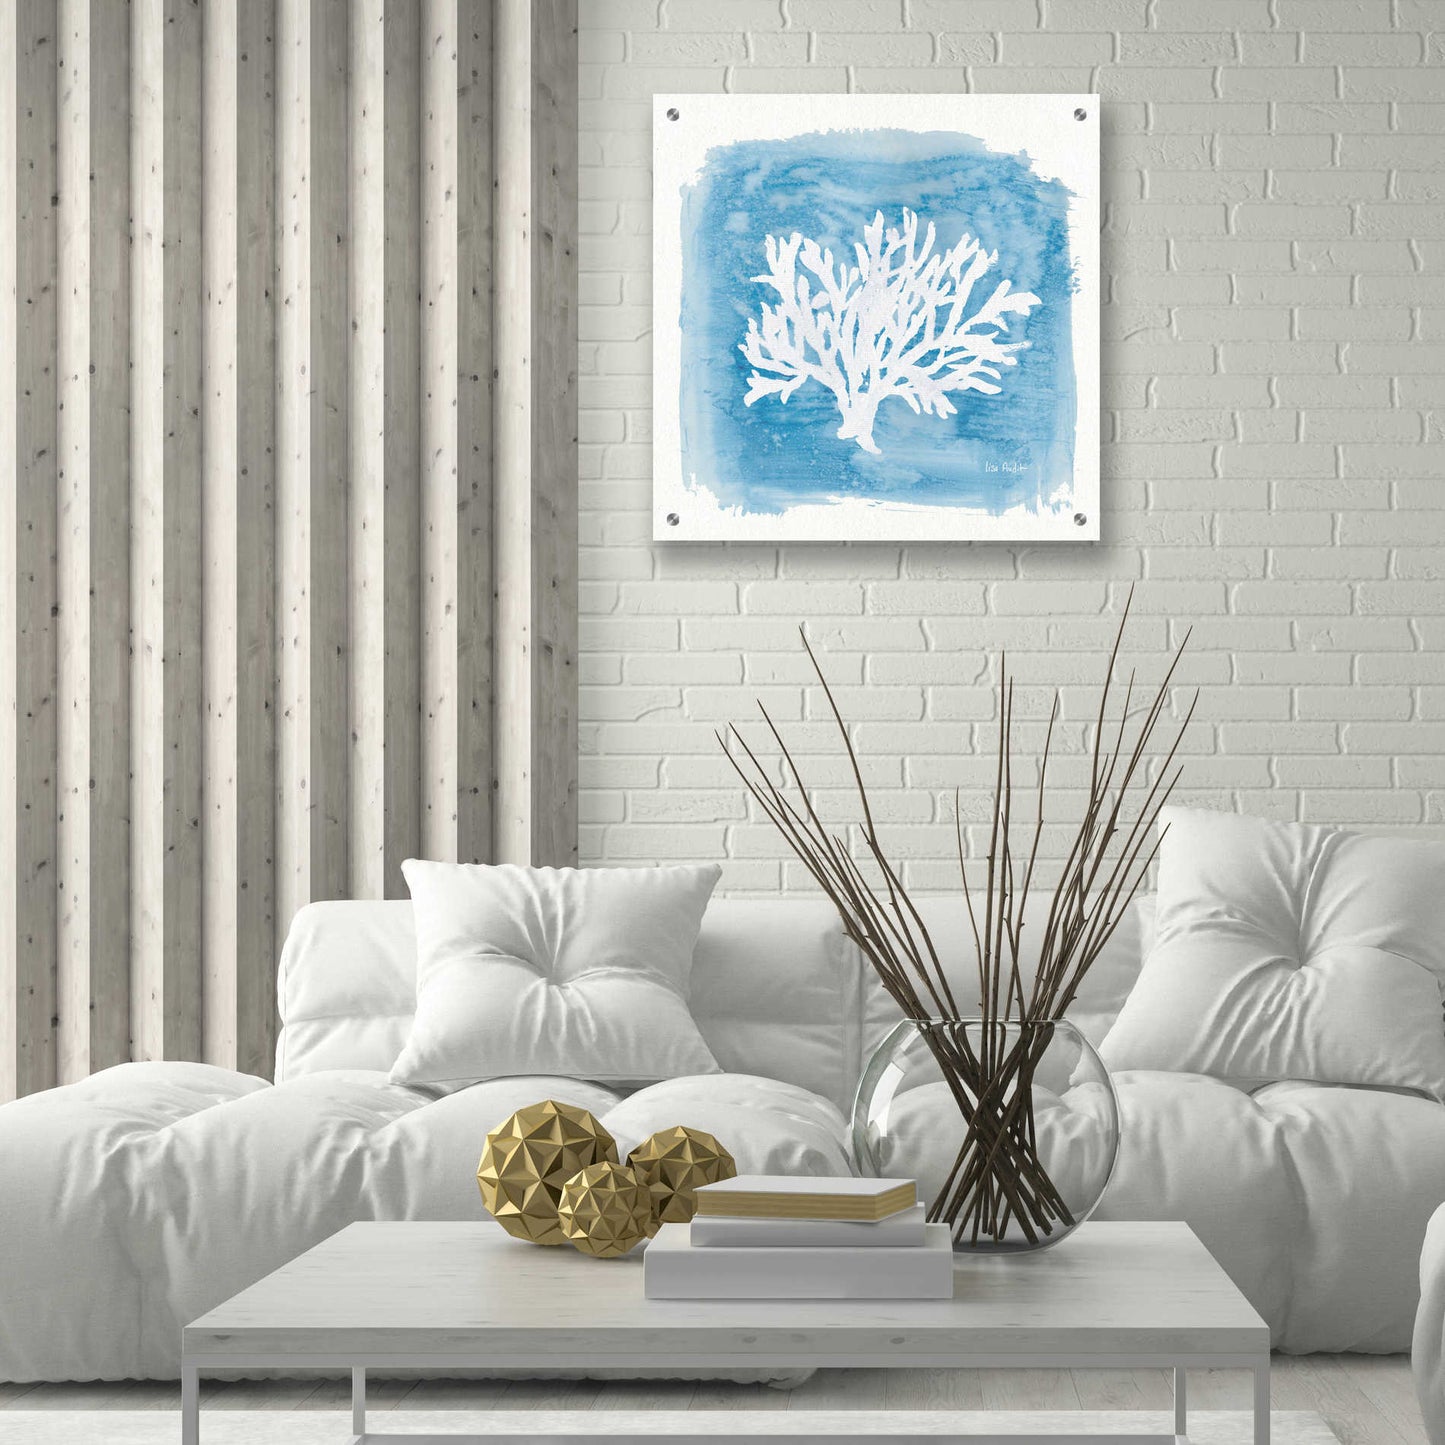 Epic Art 'Water Coral Cove VI' by Lisa Audit, Acrylic Glass Wall Art,24x24